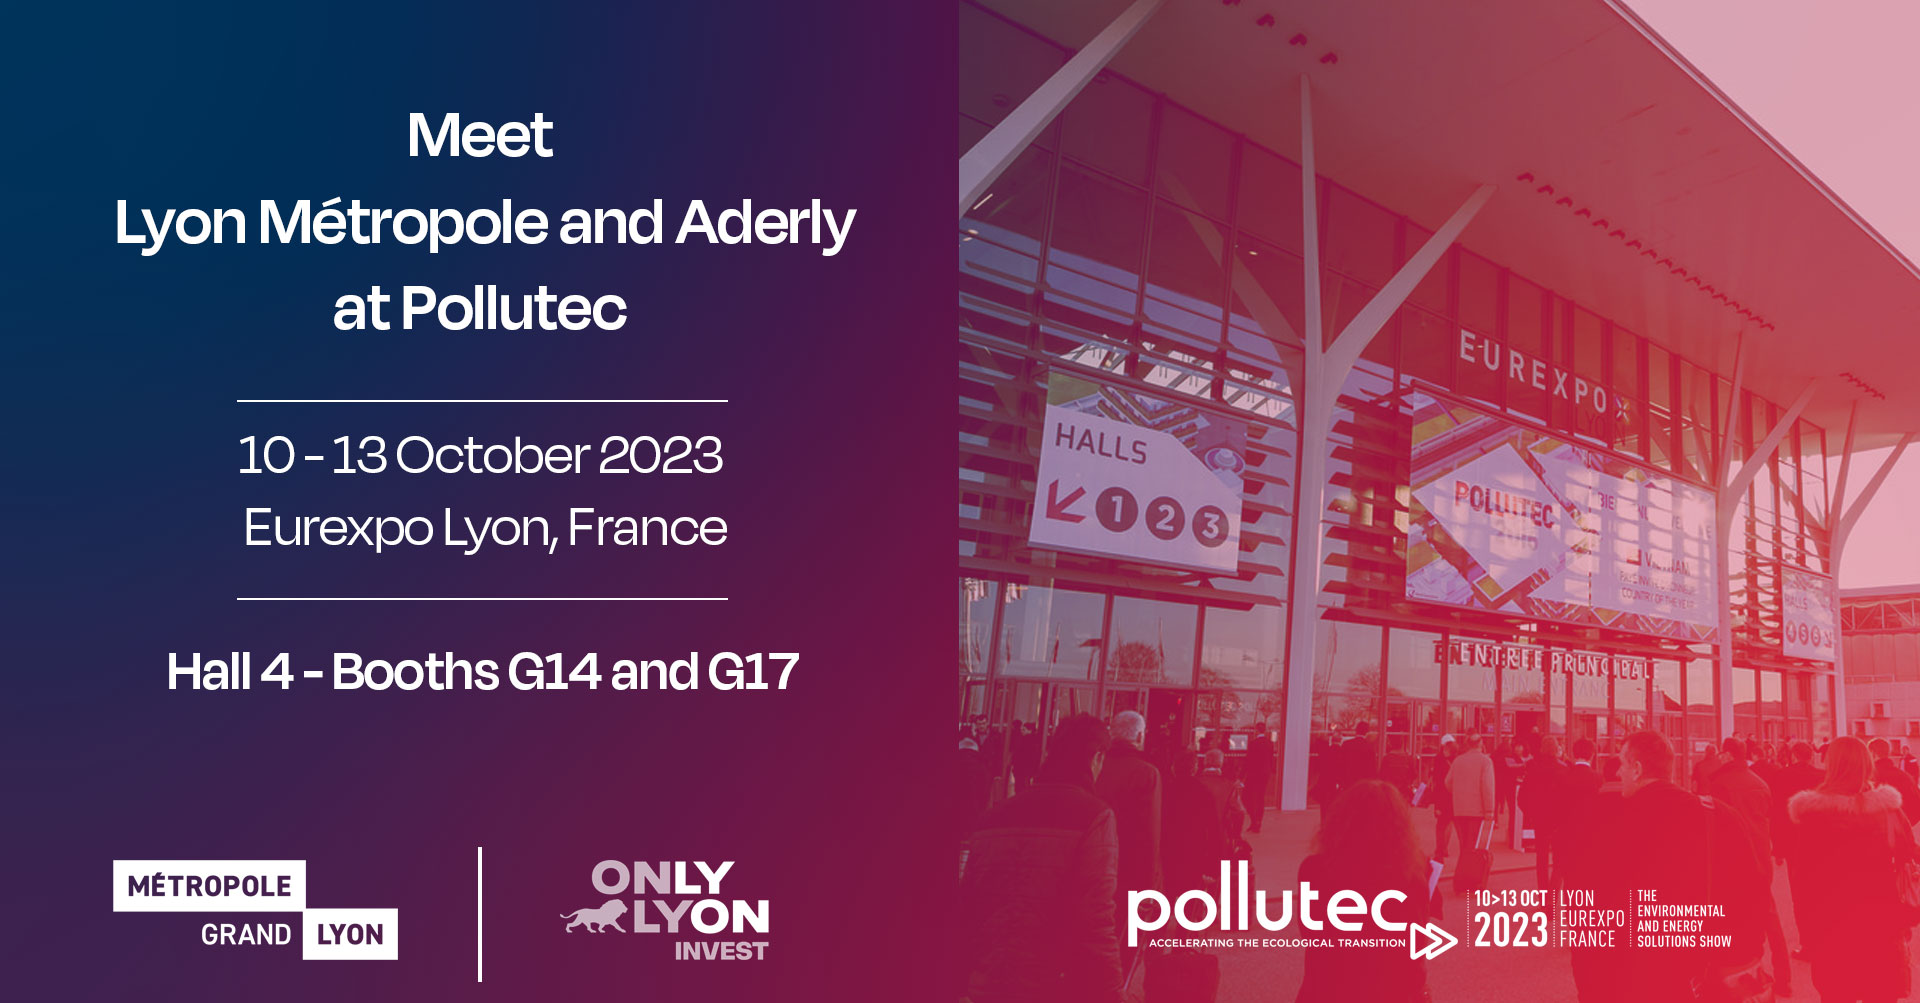 See the event Pollutec 2023: meet our experts at the event showcasing solutions for the environment and for energy